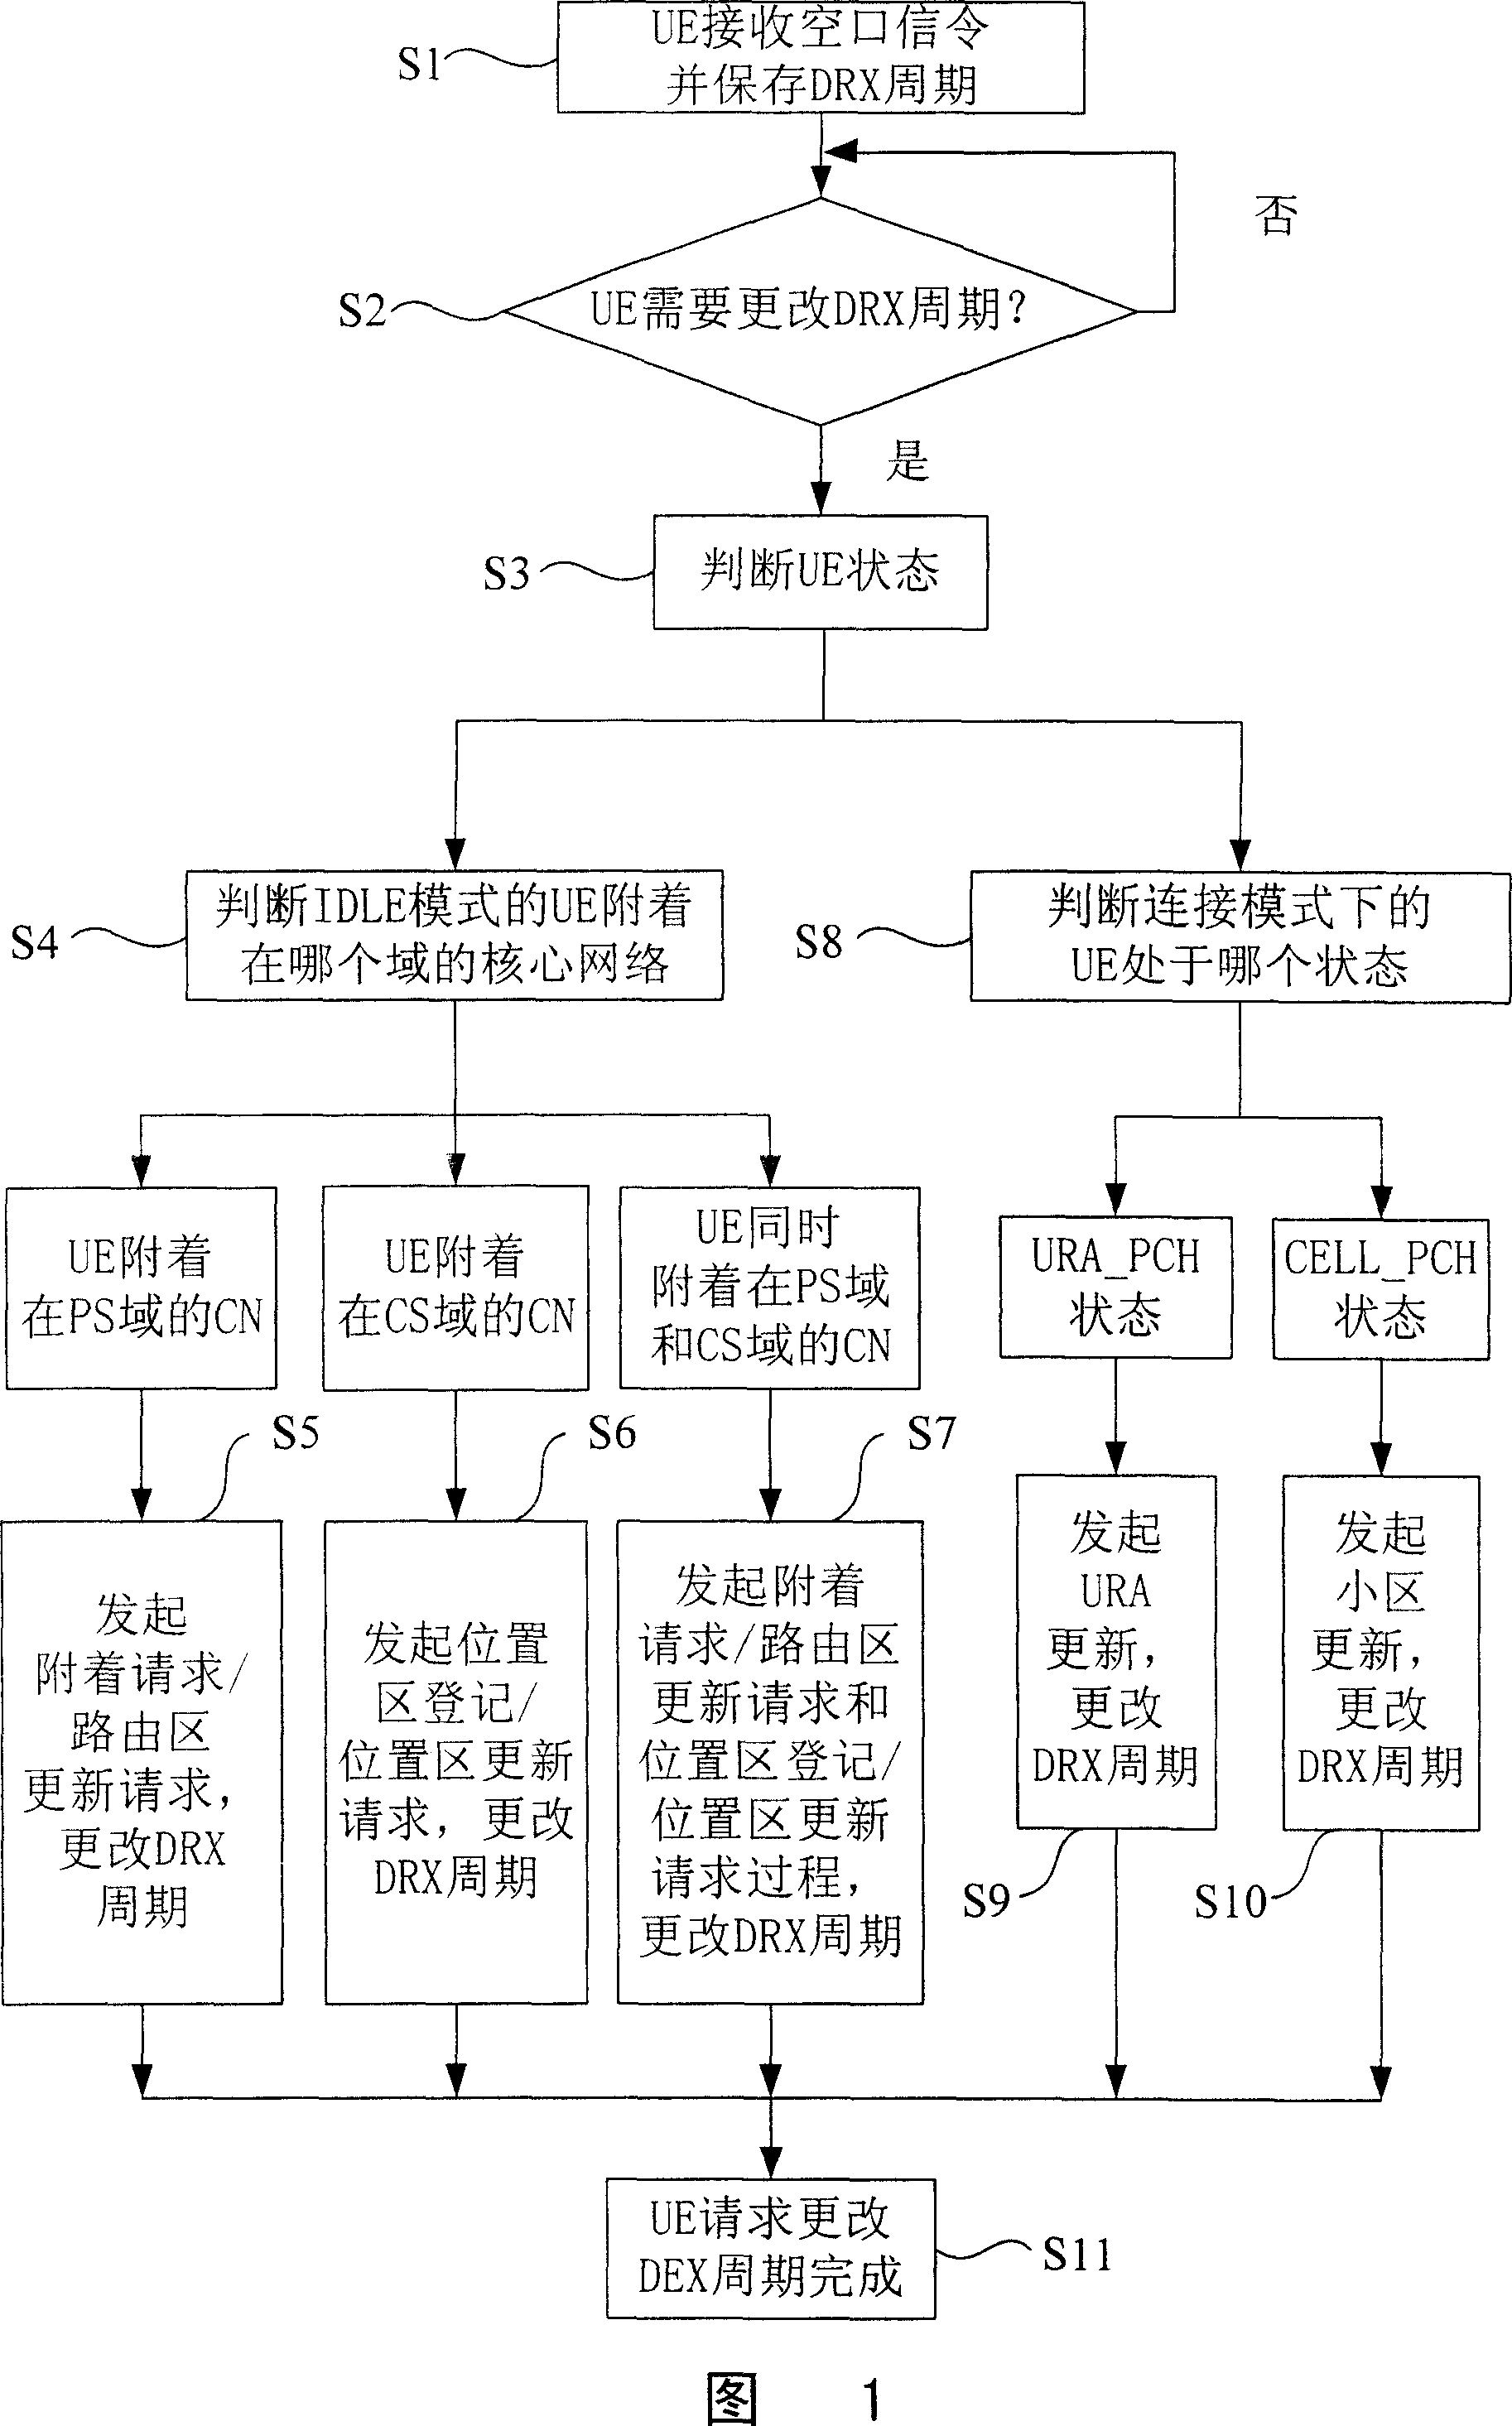 Method for negotiating DRX period in mobile communication system